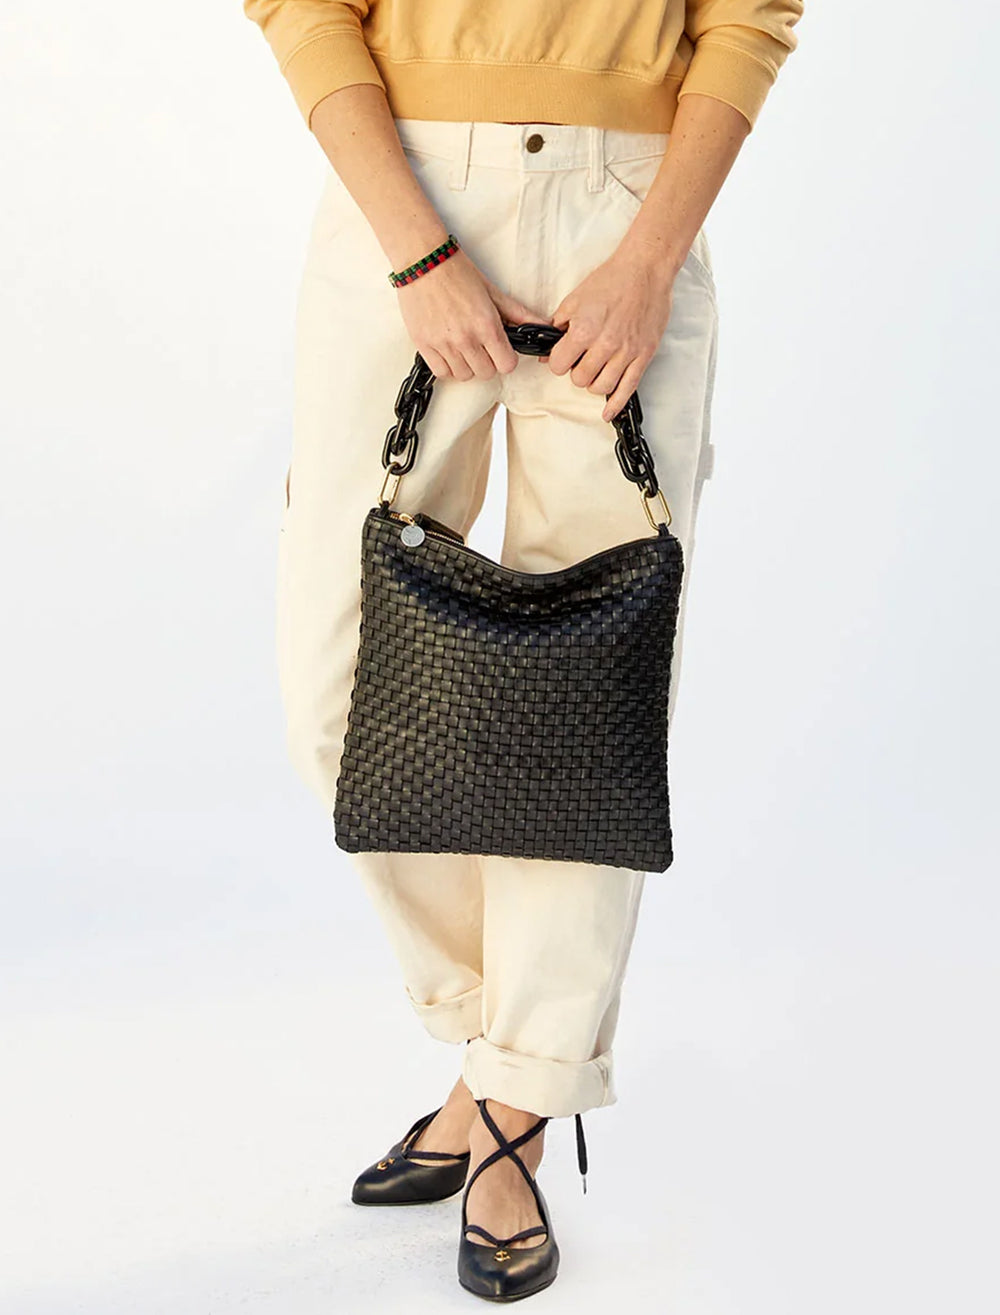 Model holding Clare V.'s foldover clutch with tabs in black woven checker